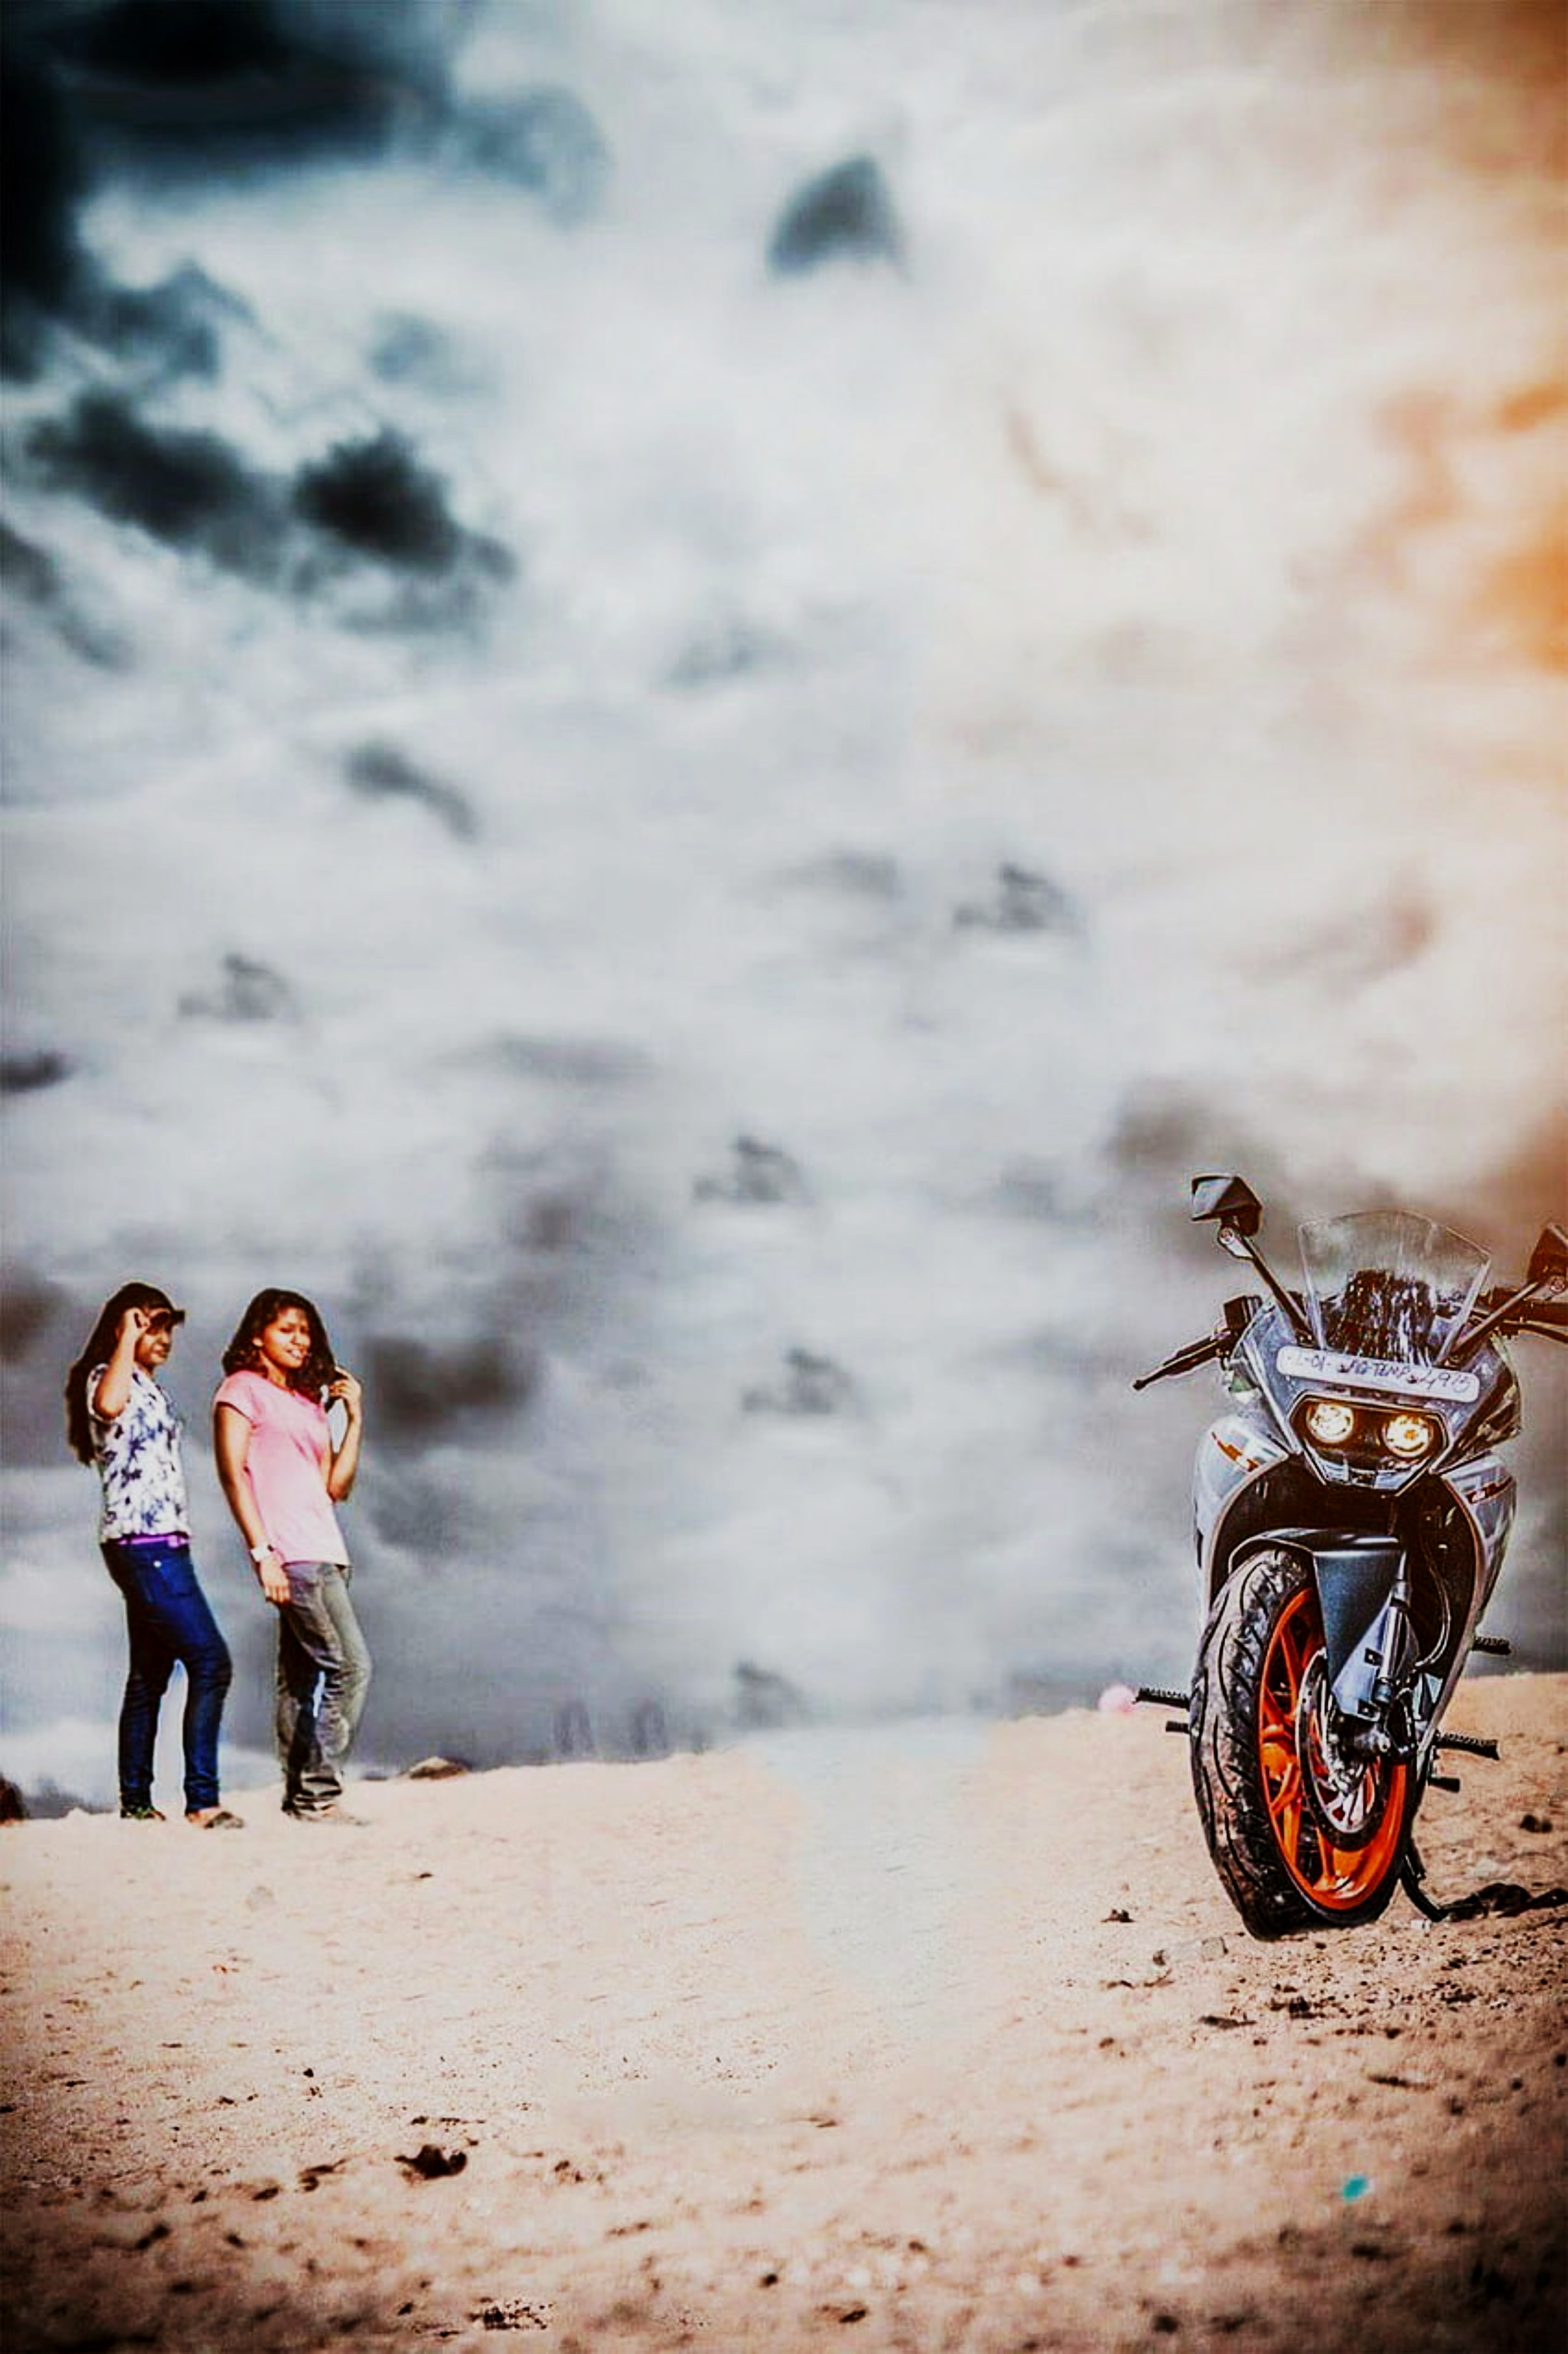 You are currently viewing Bike with girl image editing background download for free